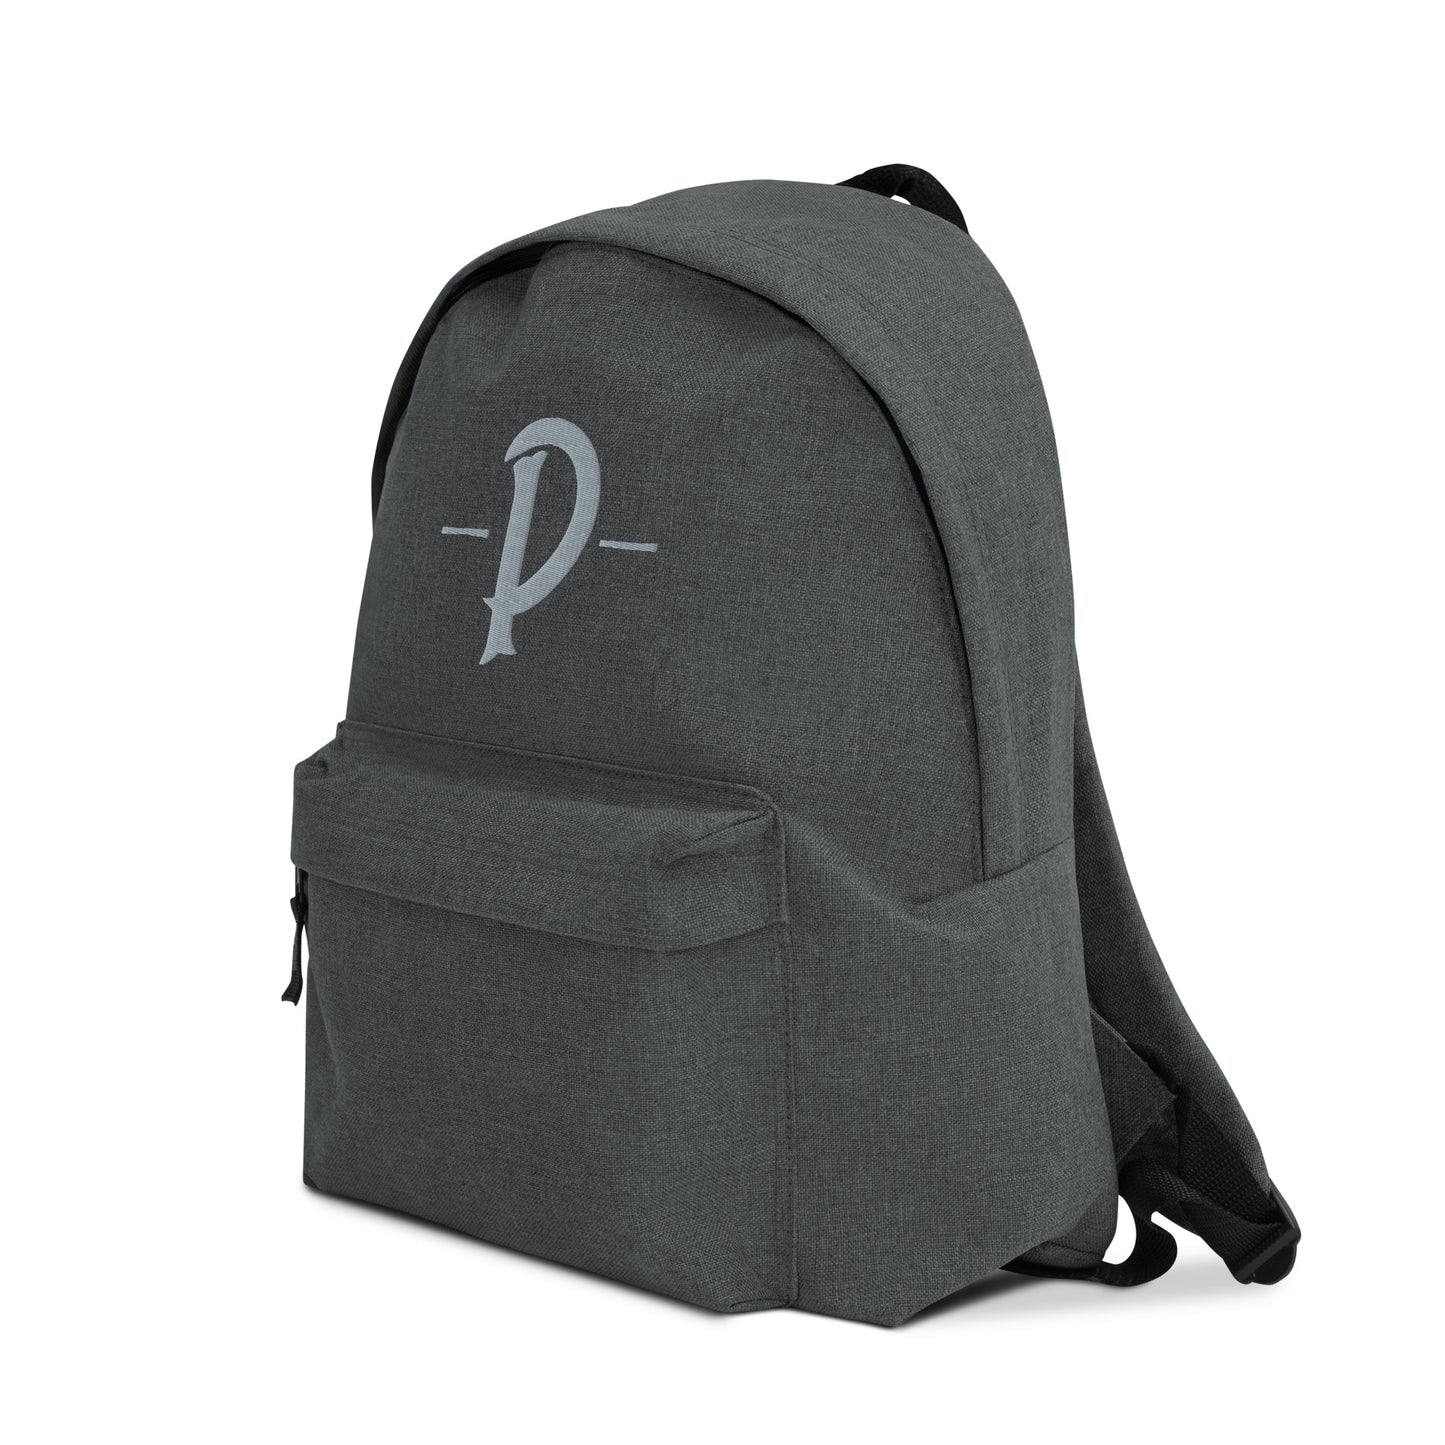 The privateers Embroidered Backpack